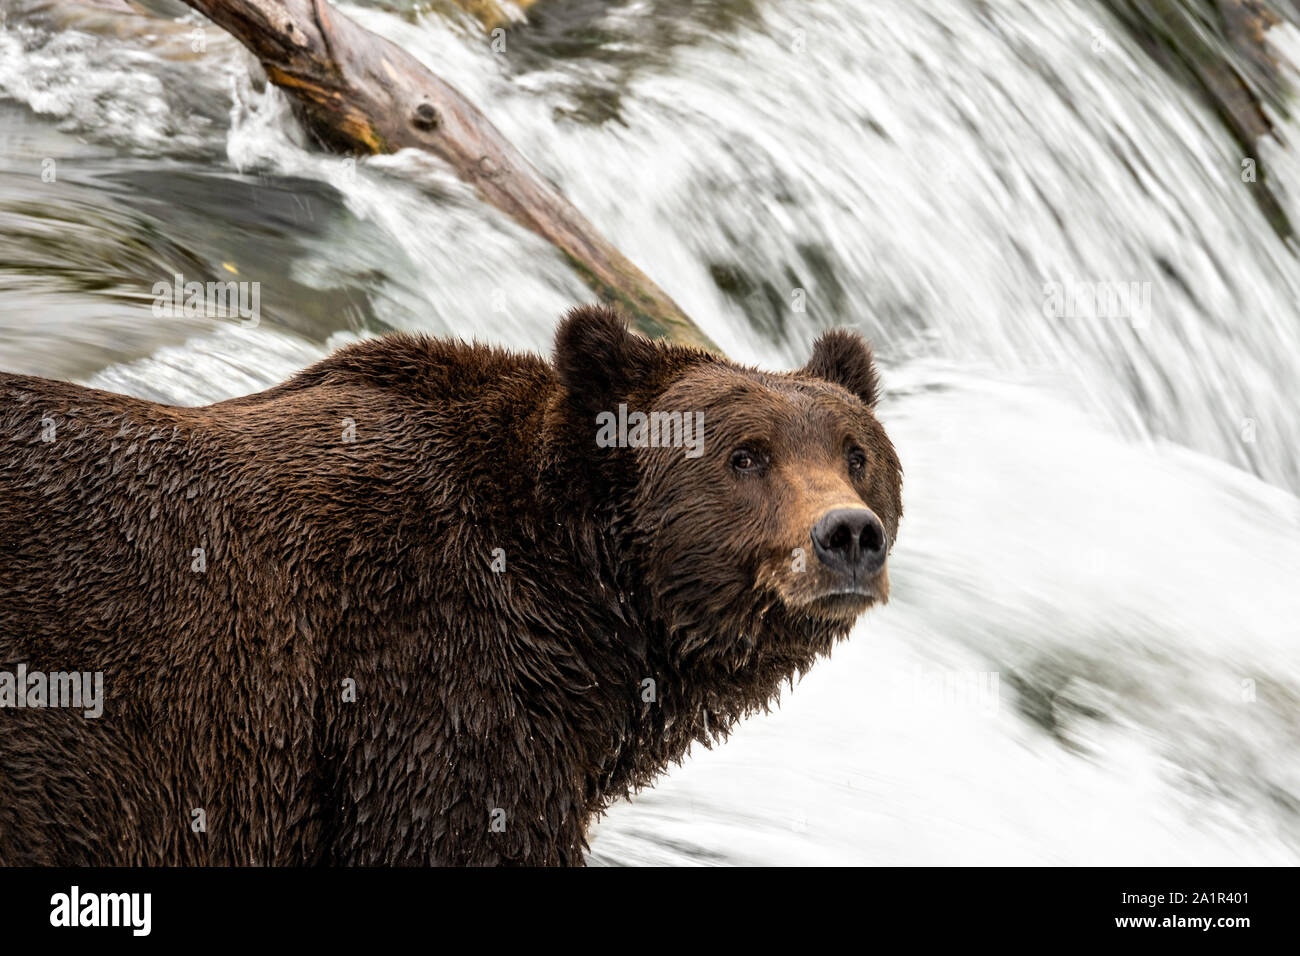 An adult Brown Bear known as 151 Walker, watches for spawning Sockeye Salmon at the lip of Brooks Falls in Katmai National Park and Preserve September 15, 2019 near King Salmon, Alaska. The park spans the worlds largest salmon run with nearly 62 million salmon migrating through the streams which feeds some of the largest bears in the world. Stock Photo